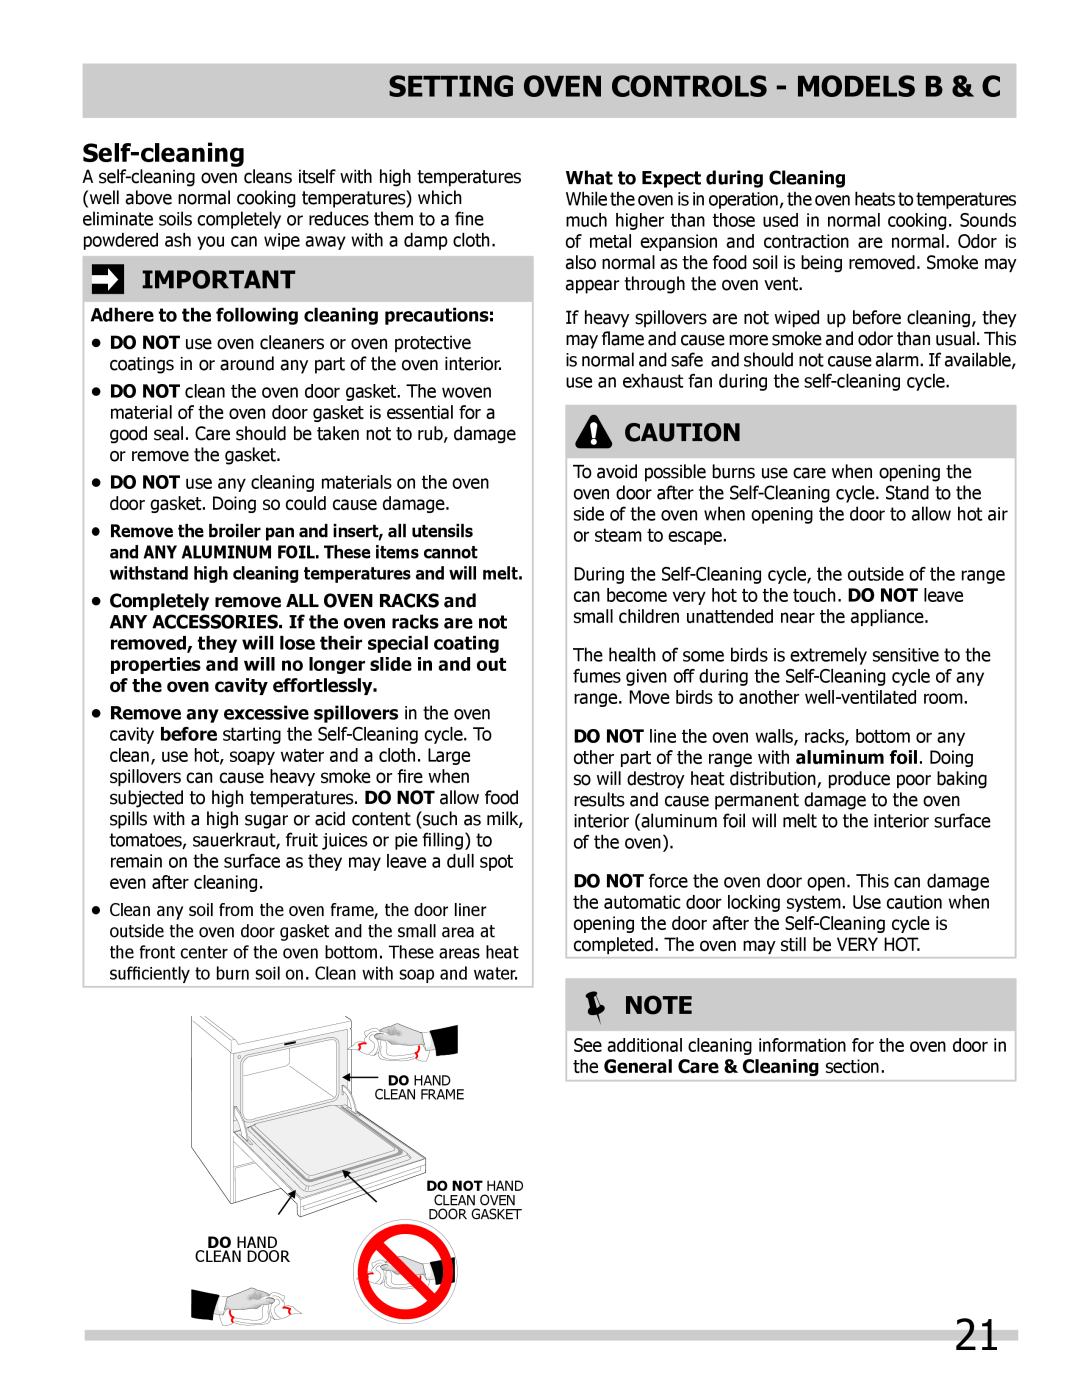 Frigidaire Self-cleaning, Setting OVEN controls - Models B & C, Note, Adhere to the following cleaning precautions 